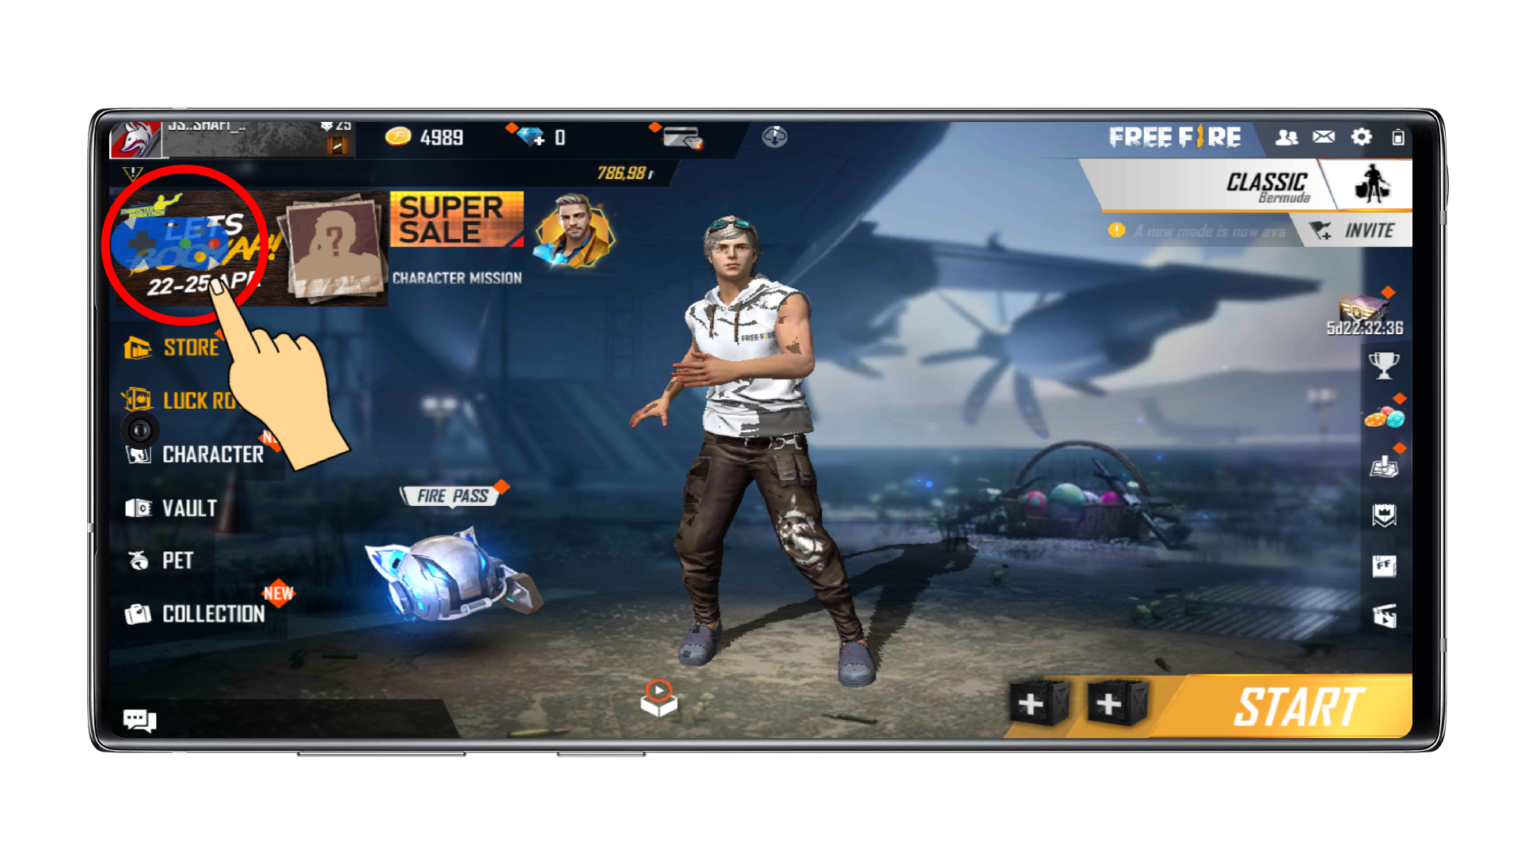 Technoquikie - These are the screenshot Freefire Hack from